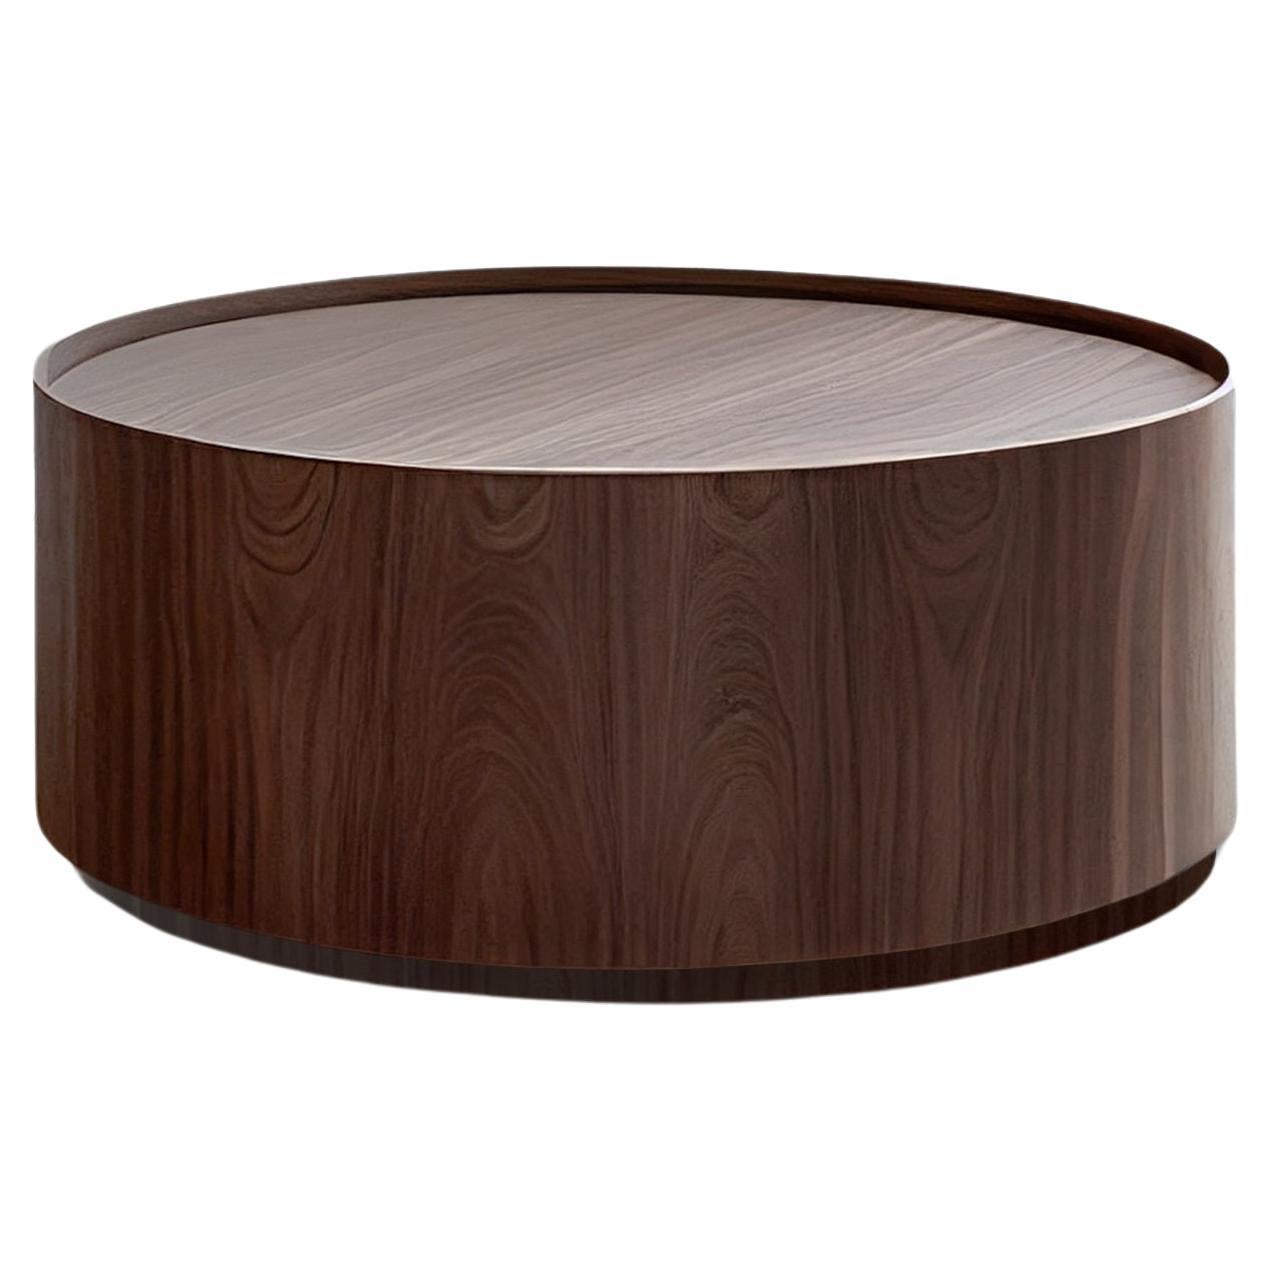 Round Coffee Table Made of Walnut Veneer by Nono Furniture For Sale